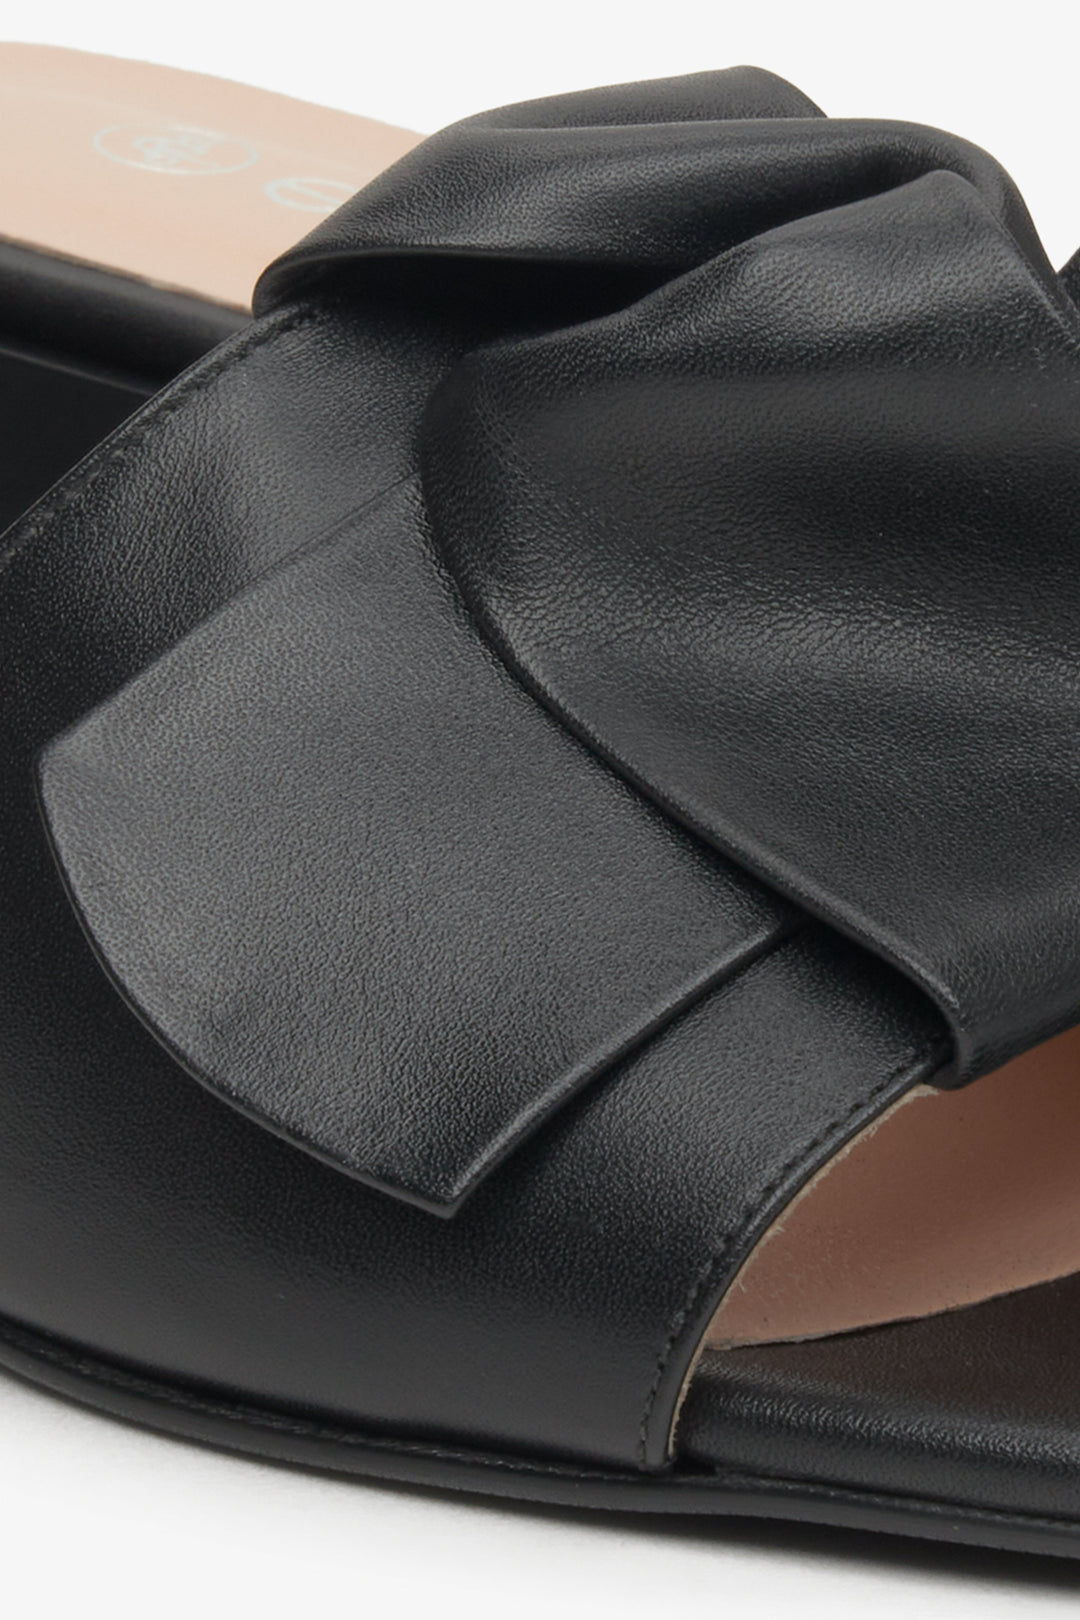 Women's black leather  mules by Estro with a decorative bow - close-up on the ornament.